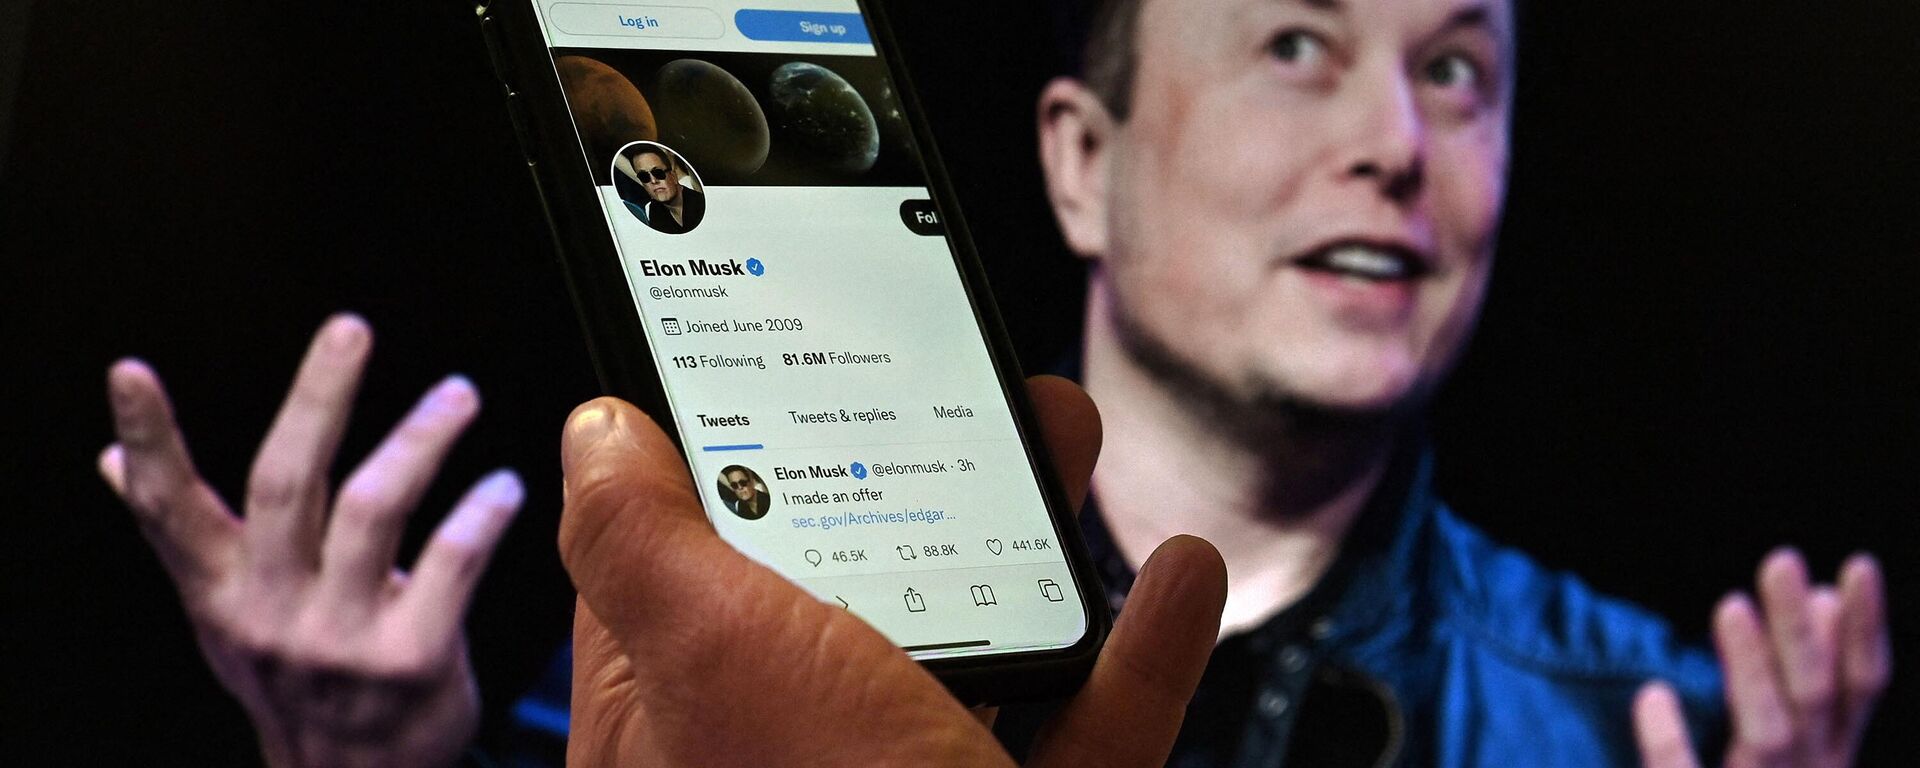 (FILES) In this file photo illustration taken on April 14, 2022 a phone screen displays the Twitter account of Elon Musk with a photo of him shown in the background, in Washington, DC.  - Sputnik International, 1920, 10.12.2022